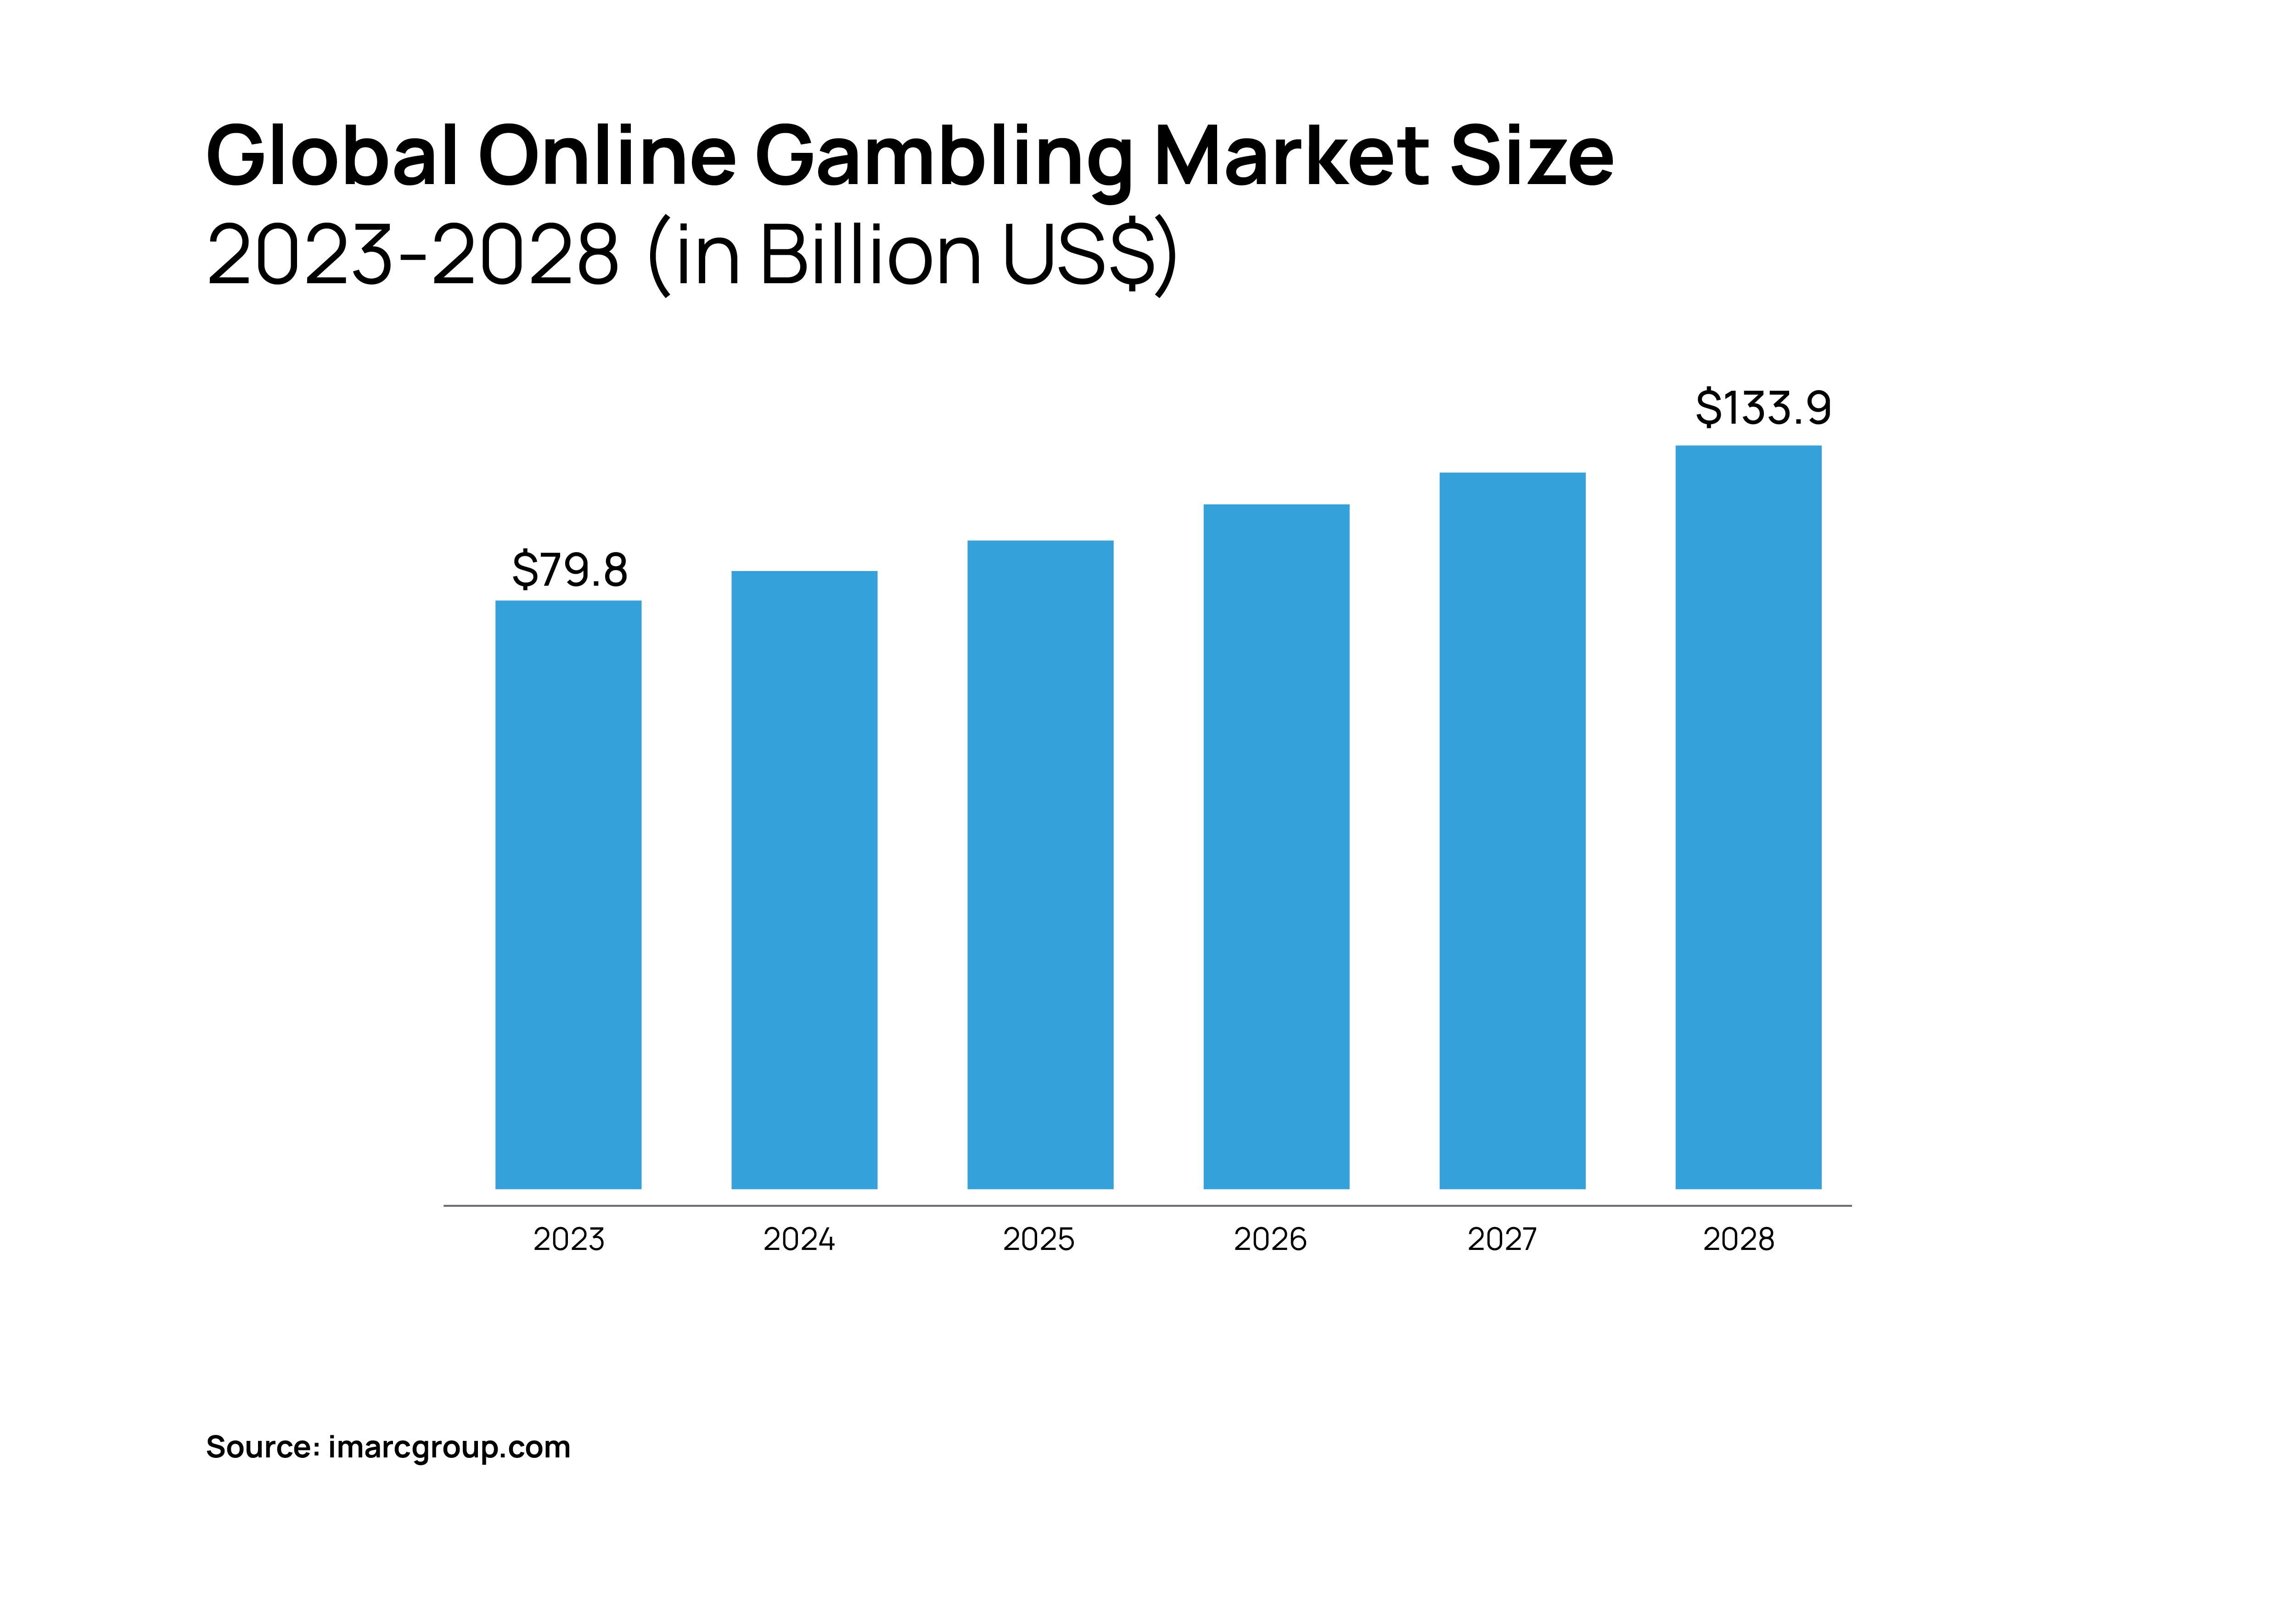 the global size of online gambling market 2023-2028